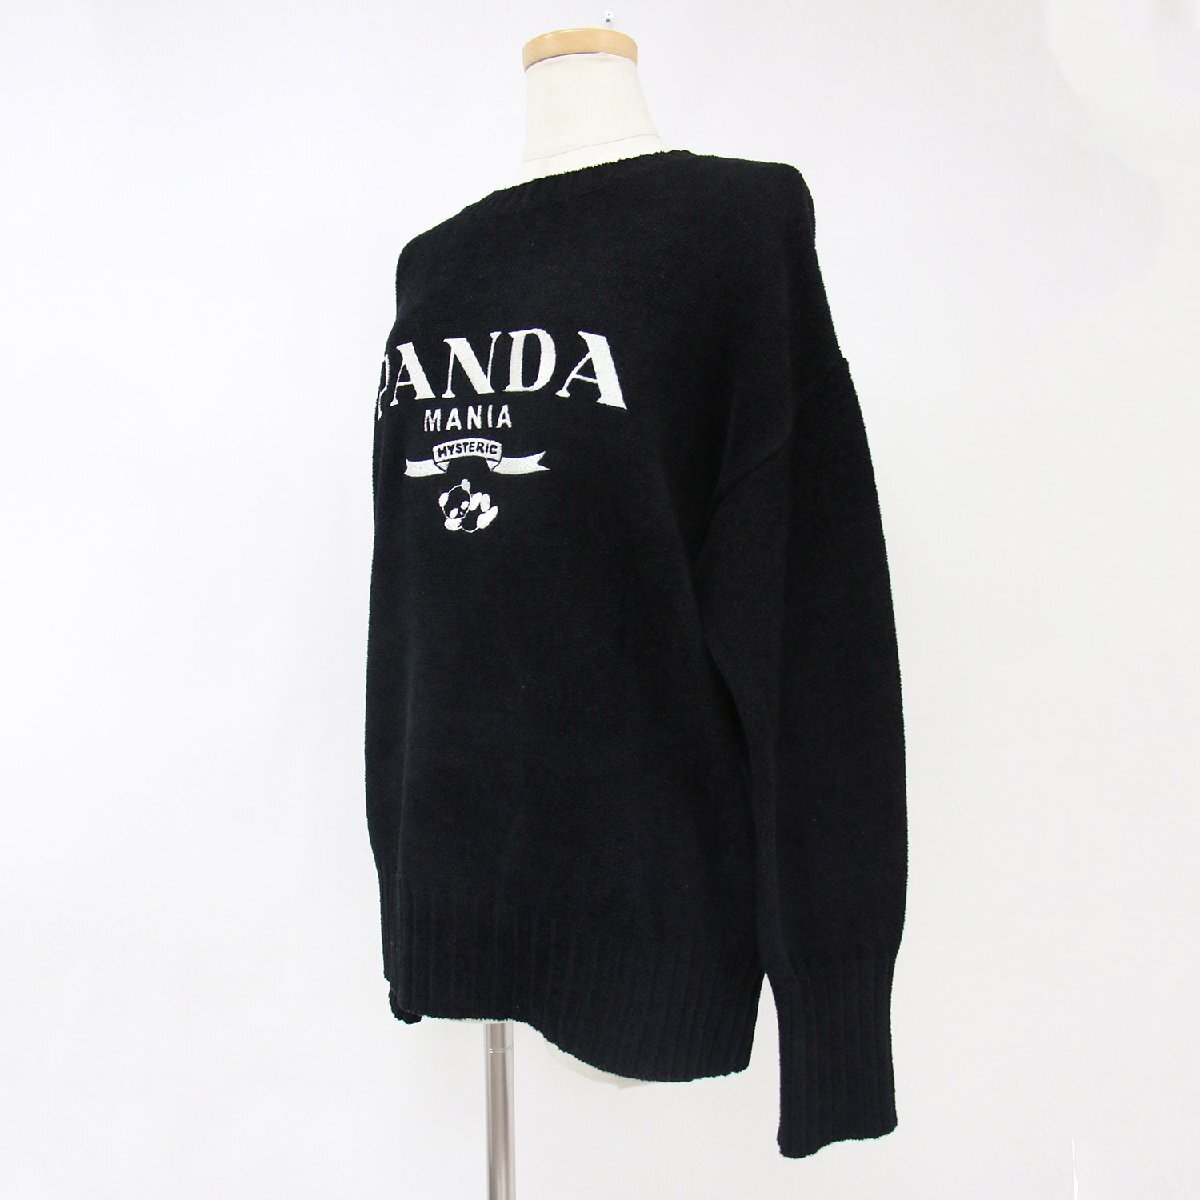 HYSTERIC GLAMOUR Hysteric Glamour knitted pull over tops black FREE long sleeve crew neck embroidery Logo Panda PANDA MANIA